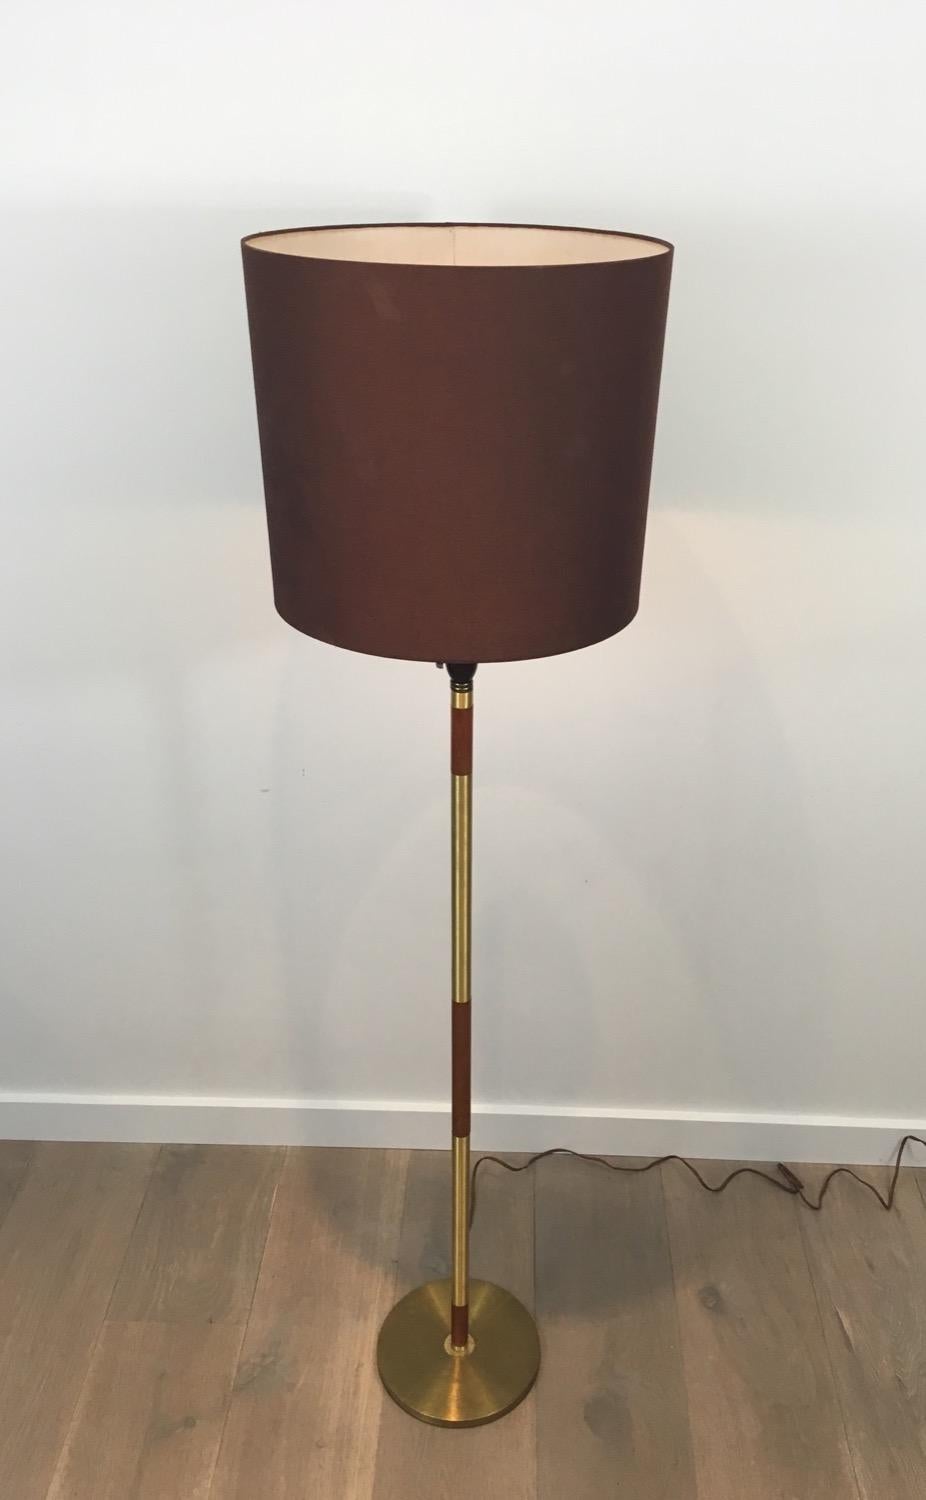 Mid-Century Modern Brass and Wood Floor Lamp, French, circa 1970